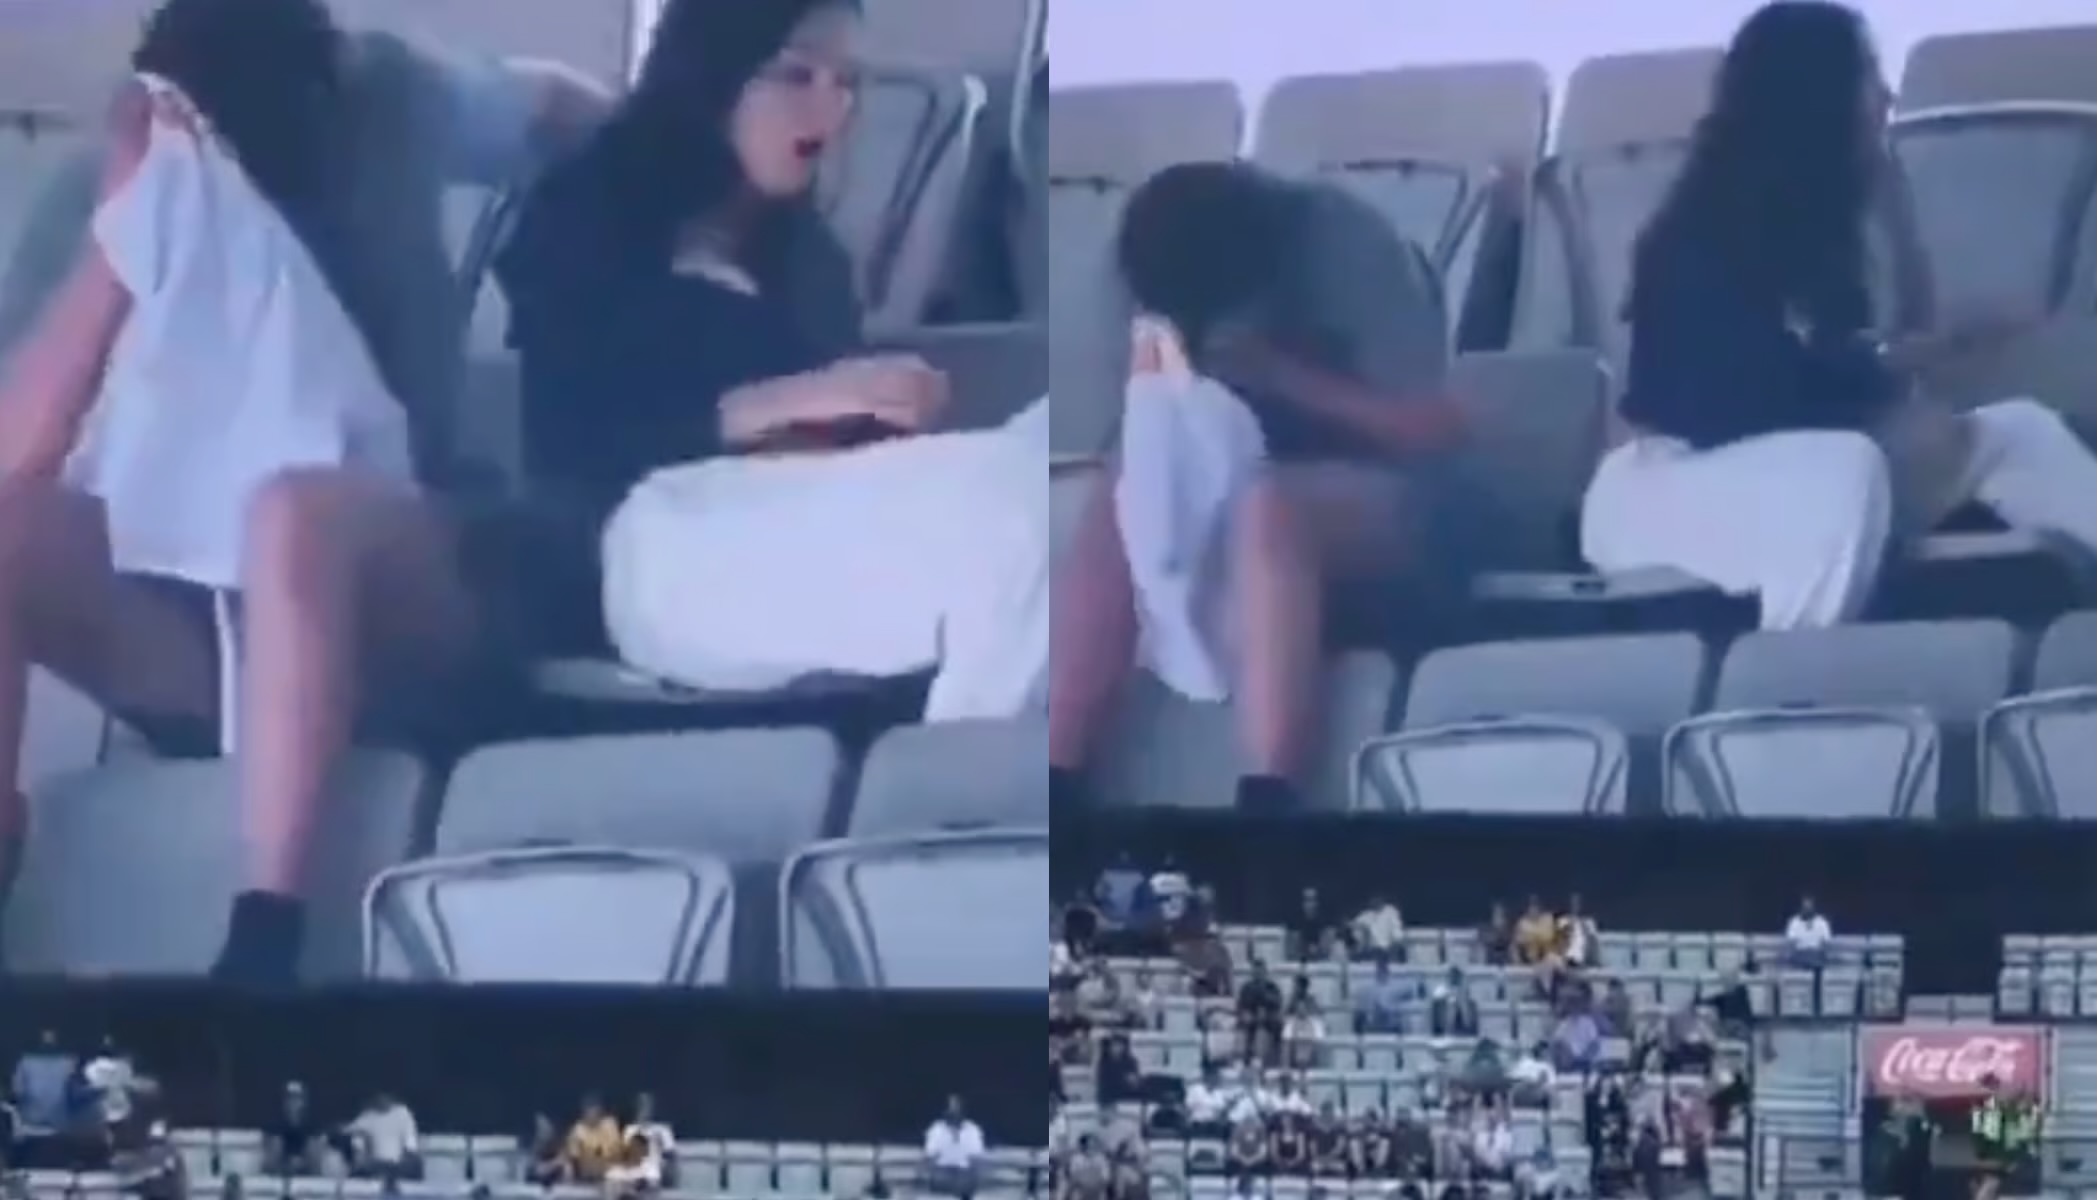 AUS vs PAK: [WATCH] Couple Shocked To See Their Private Moment Appeared On The Big Screen At The MCG